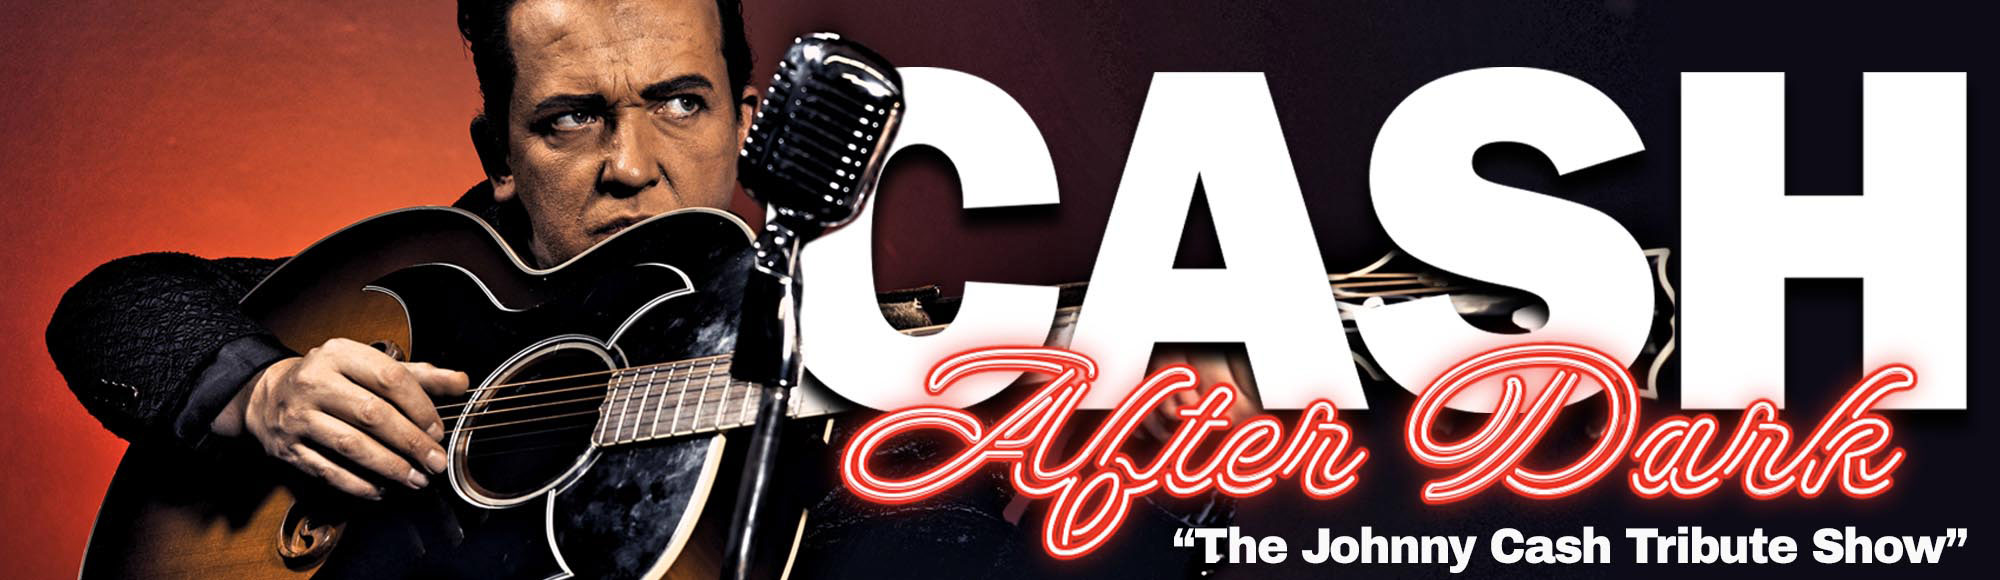 CASH After Dark: The Johnny Cash Tribute Show show